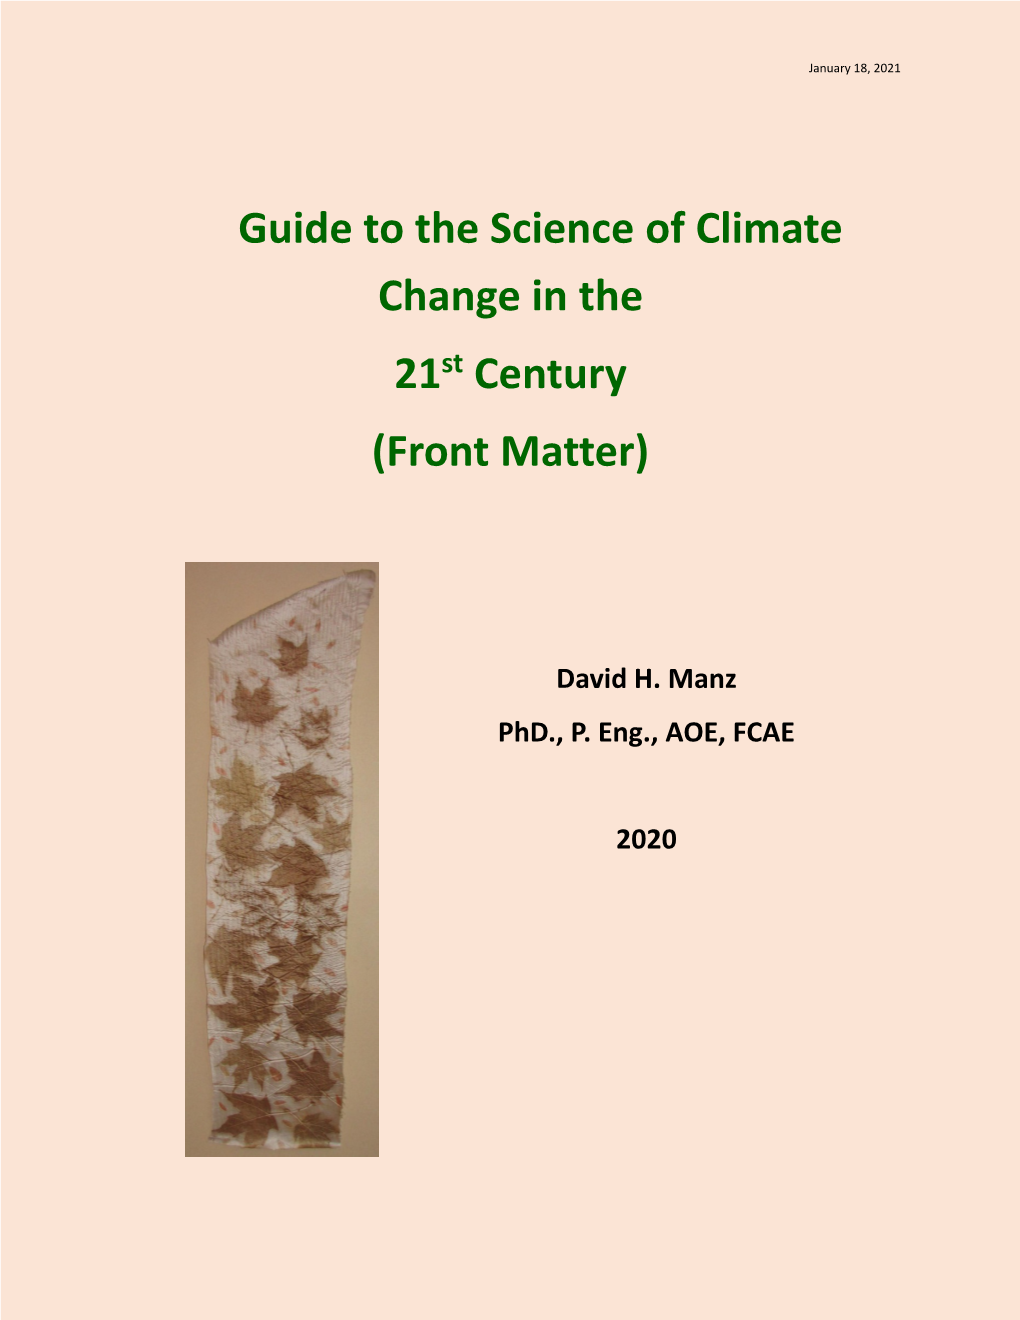 Guide to the Science of Climate Change in the 21St Century (Front Matter)